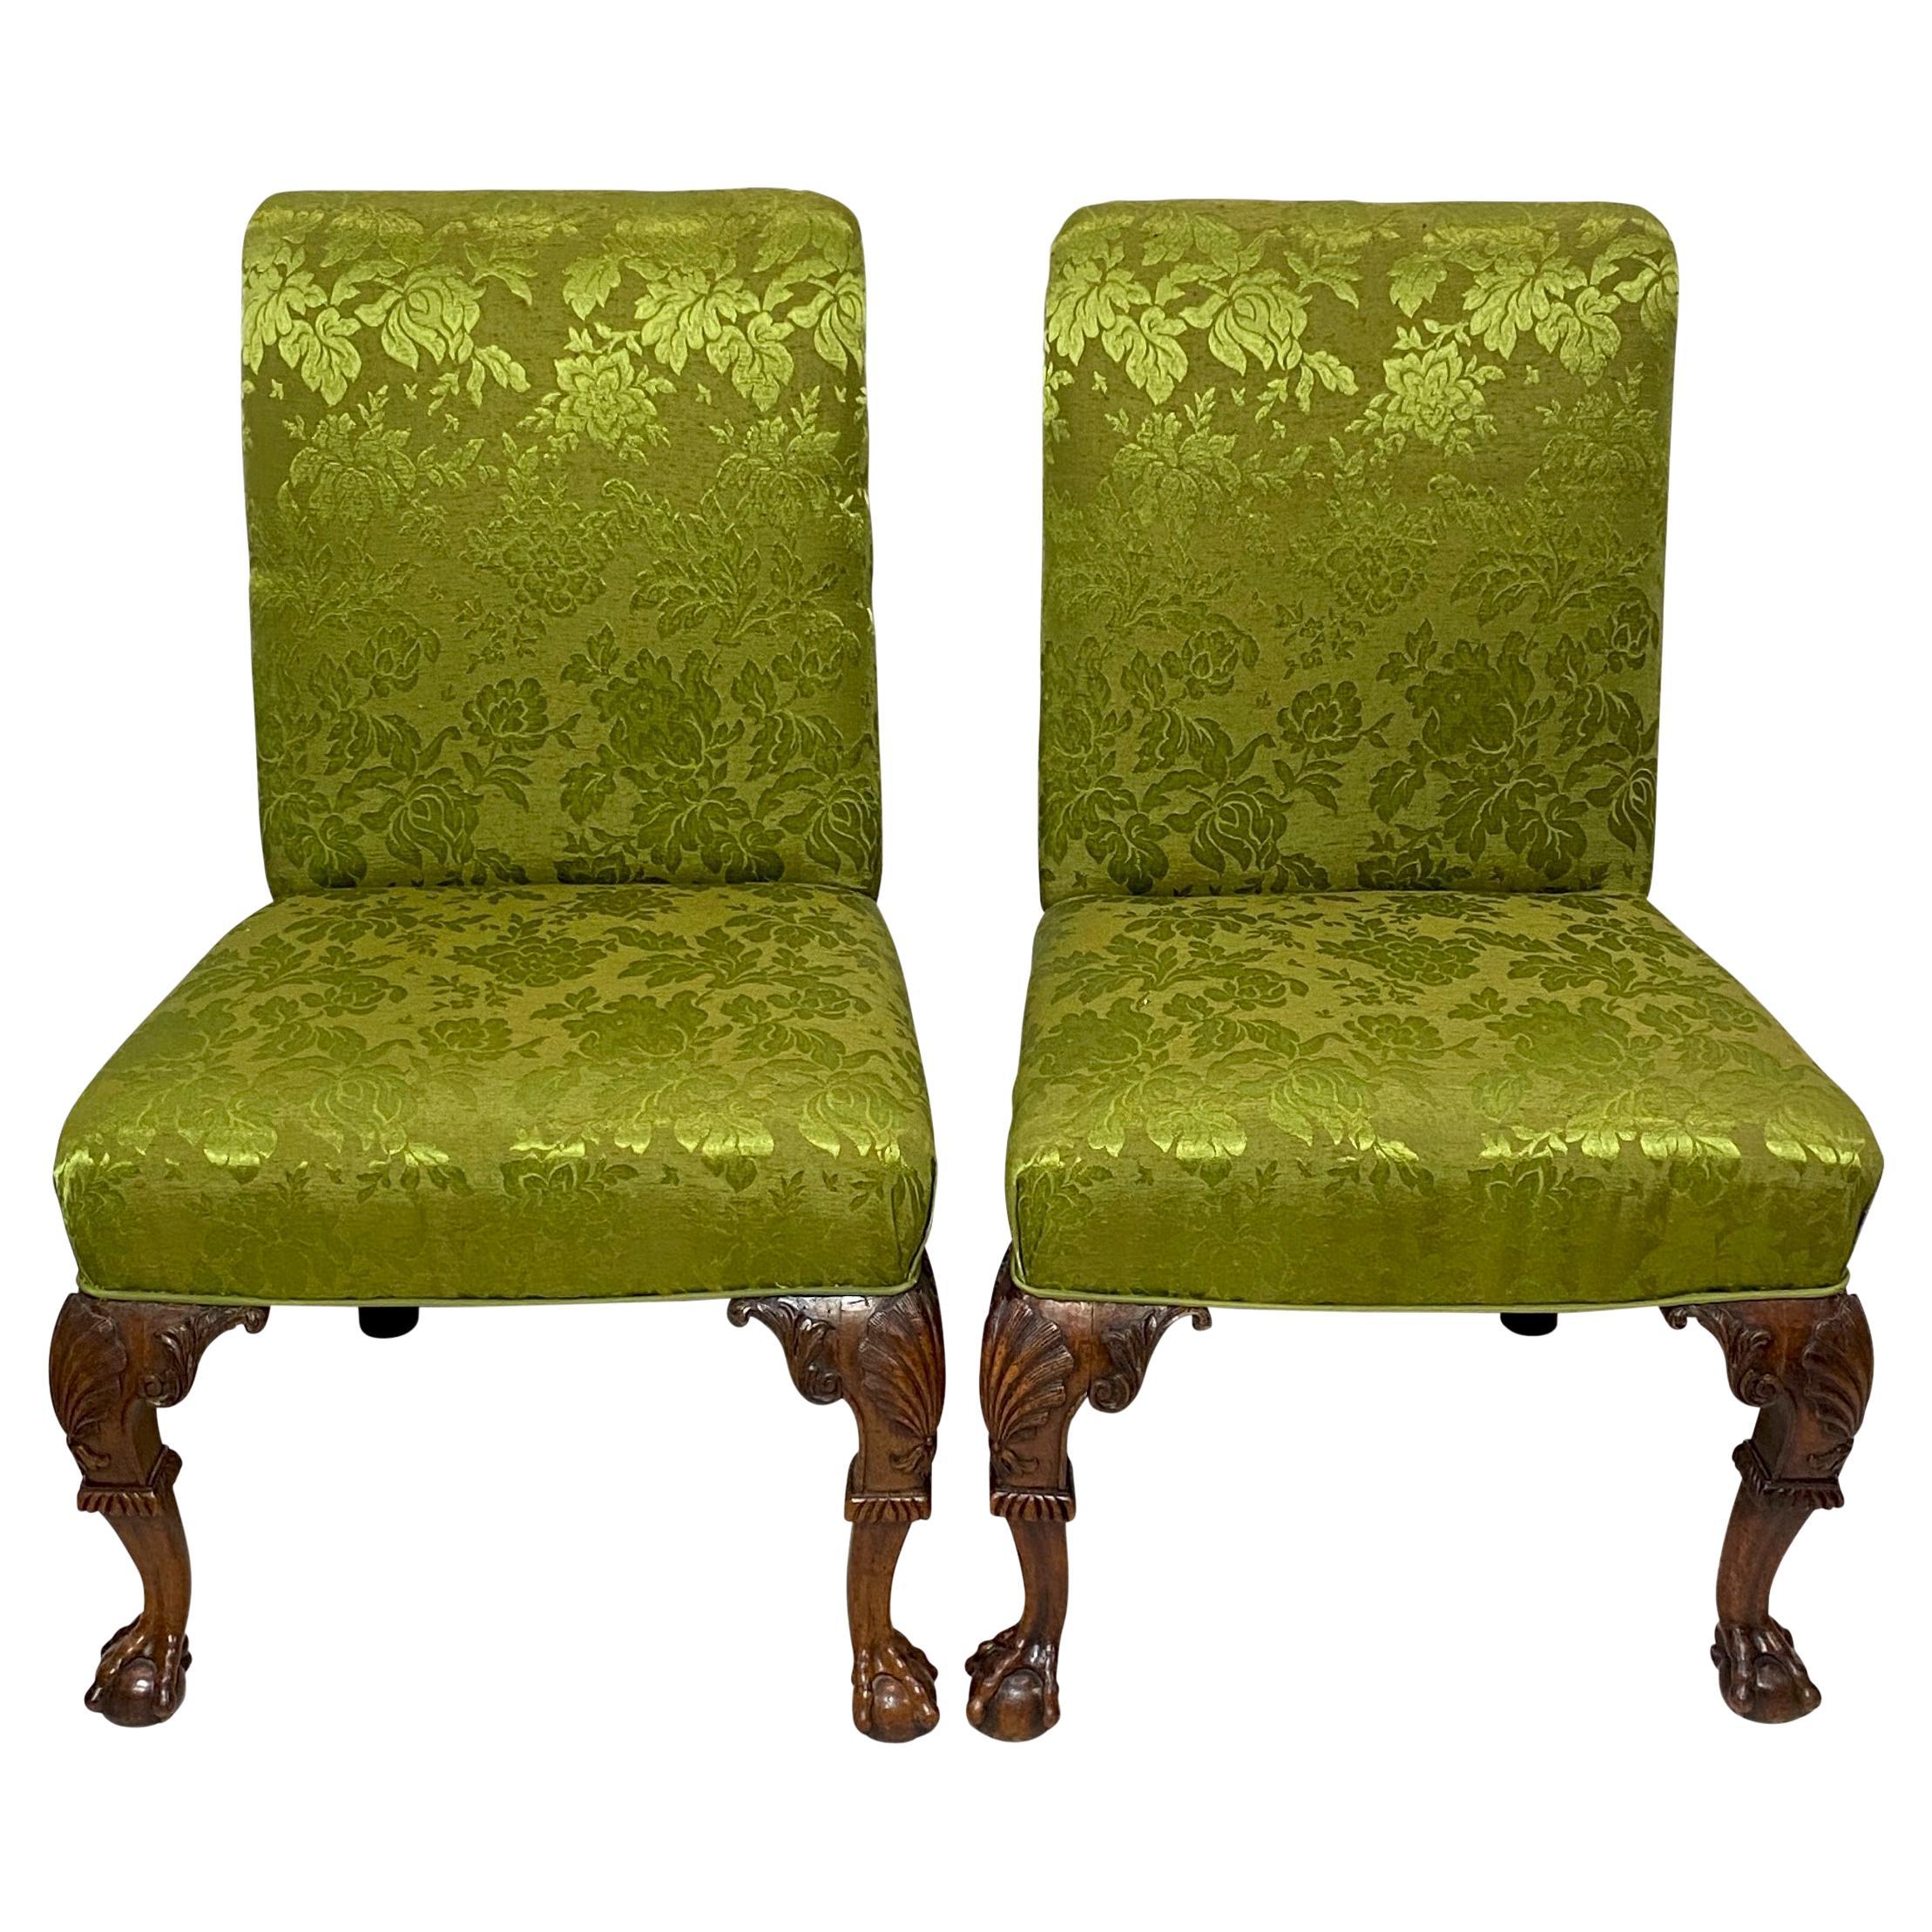 Pair of Exceptional 18th Century English Chippendale Mahogany Side Chairs For Sale